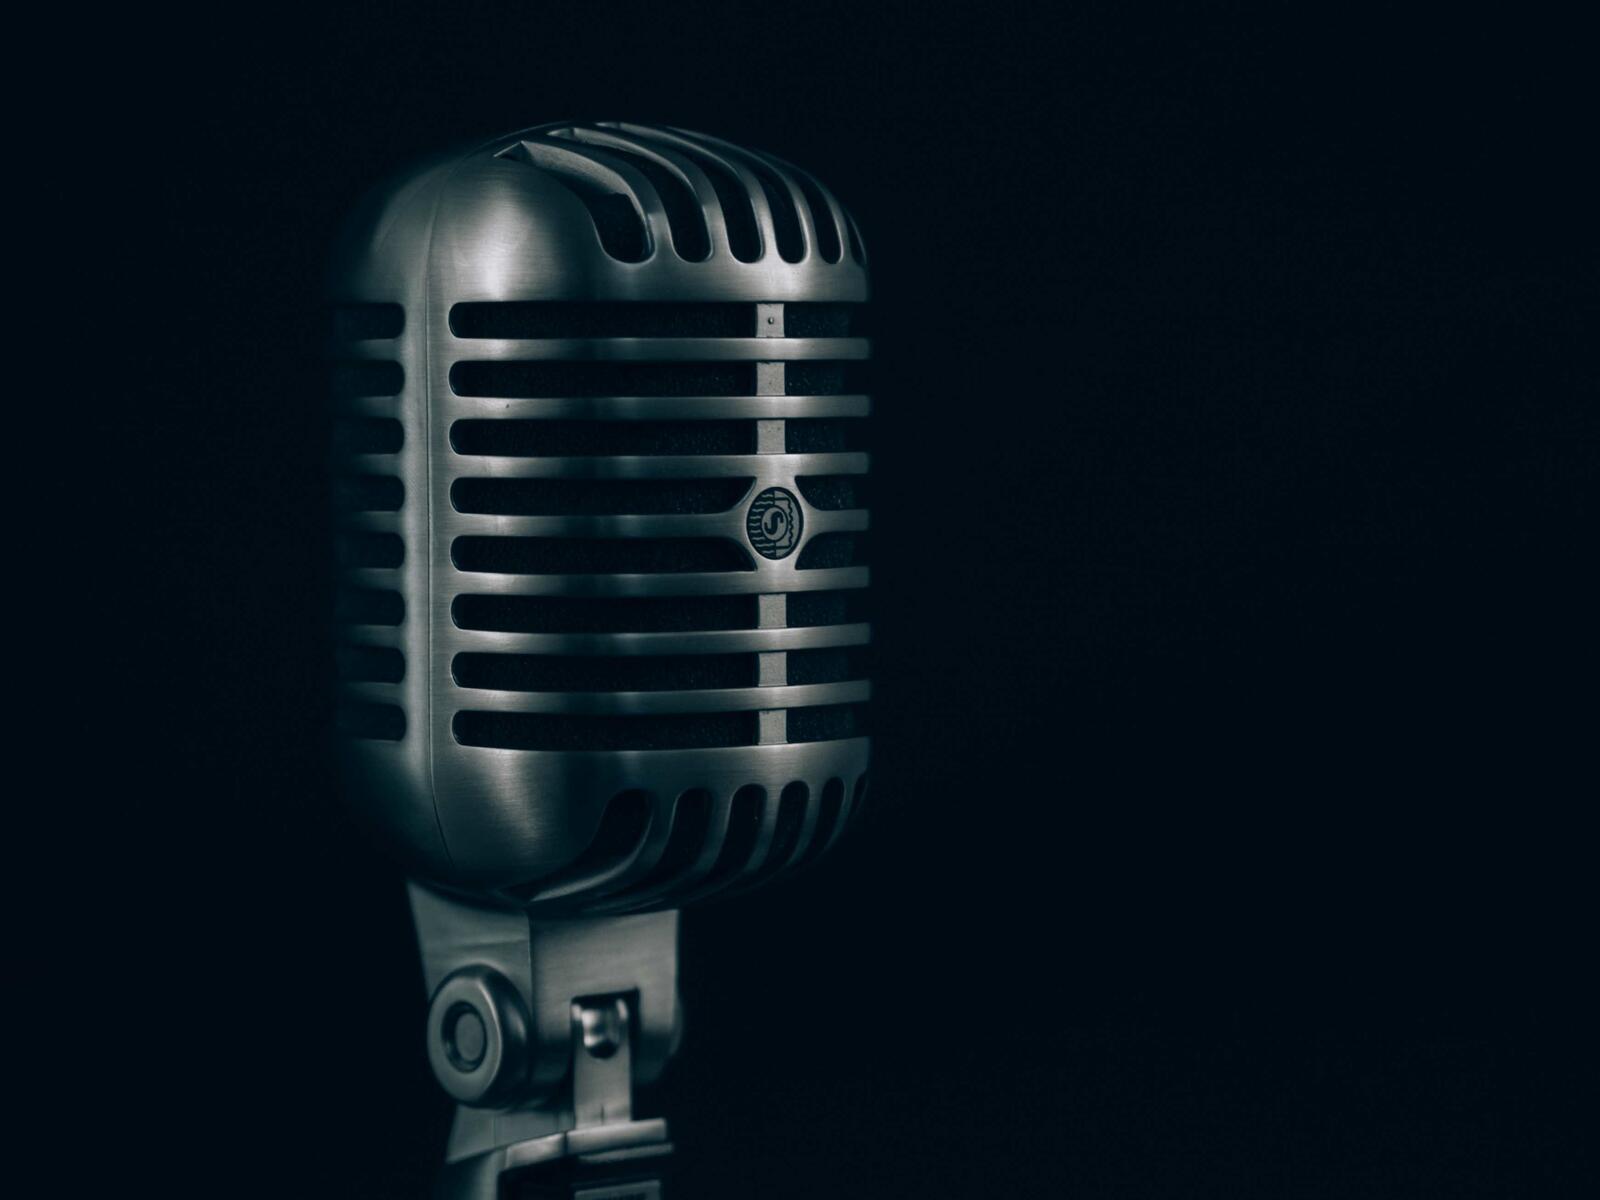 Wallpapers music black and white microphone on the desktop